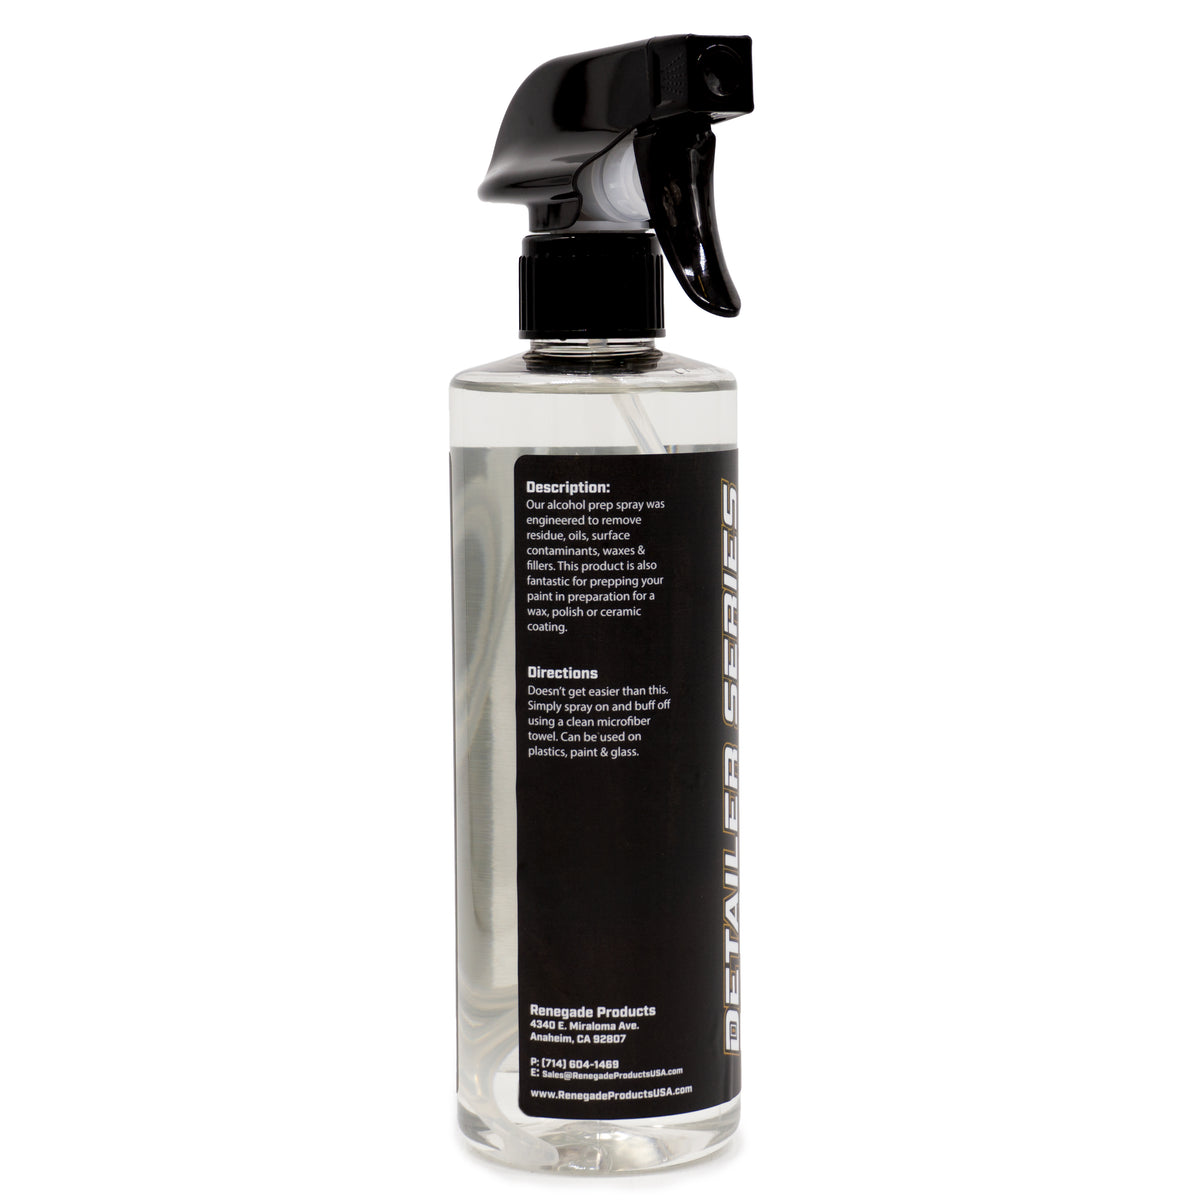 Renegade Products Graphene + Ceramic Line Alcohol Prep Spray for Detailing - High-Quality Solution for Surface Preparation and Cleaning